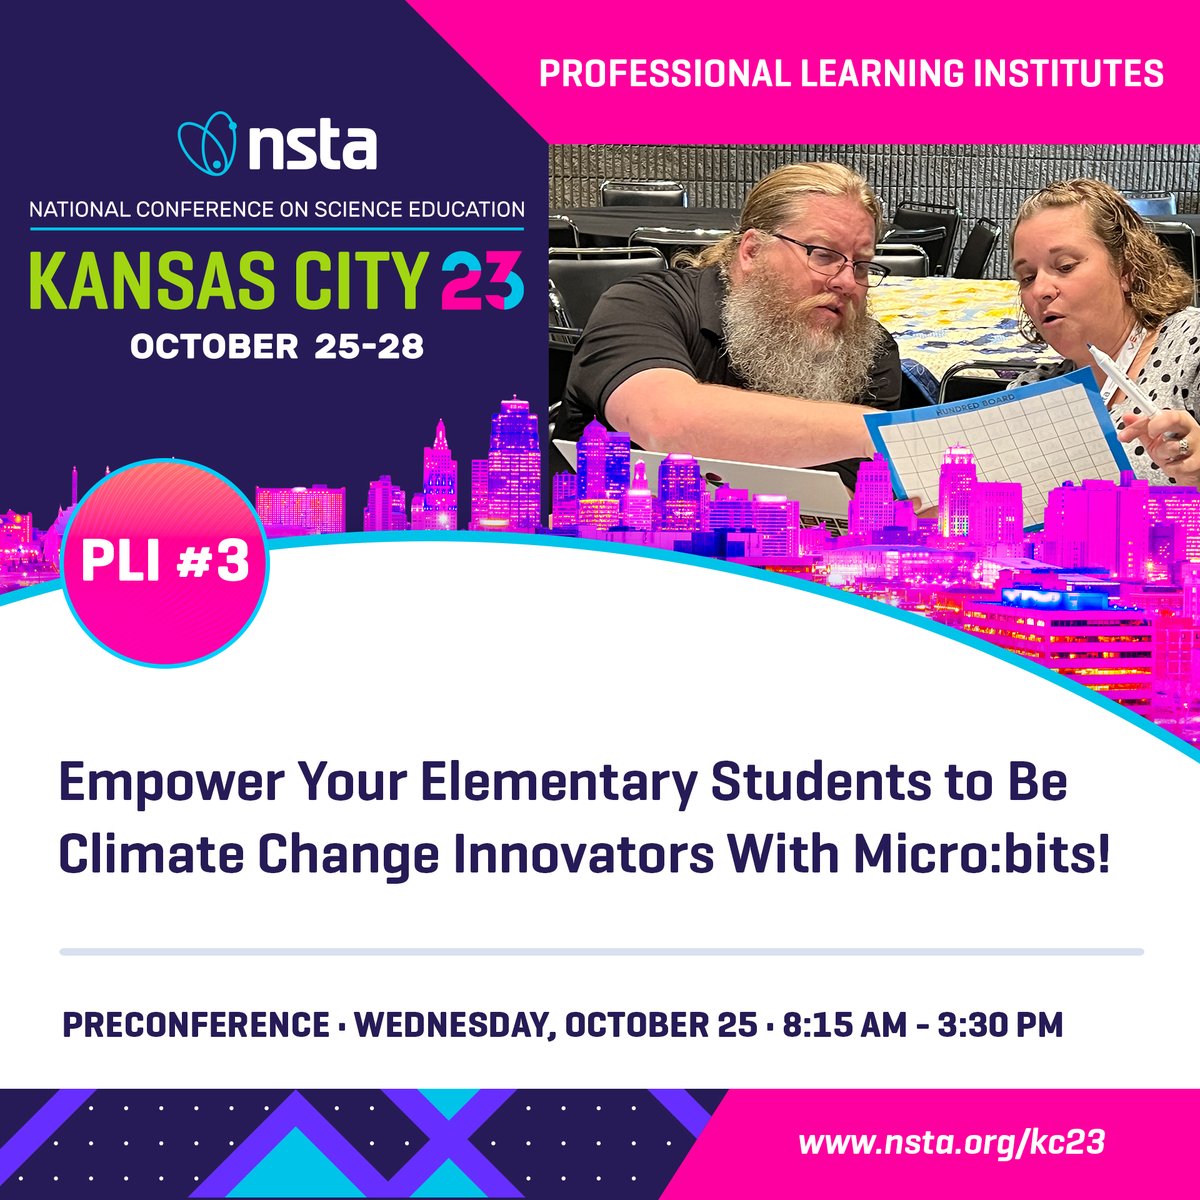 Don't miss out on this fall's #NSTA23 KC professional learning institute hosted by #AmazonFutureEngineer! Led by @BootUpPD & #NSTA, elem #teachers will learn #compsci basics & how to use micro:bits to create #climatechange solutions:tinyurl.com/47txfkb9